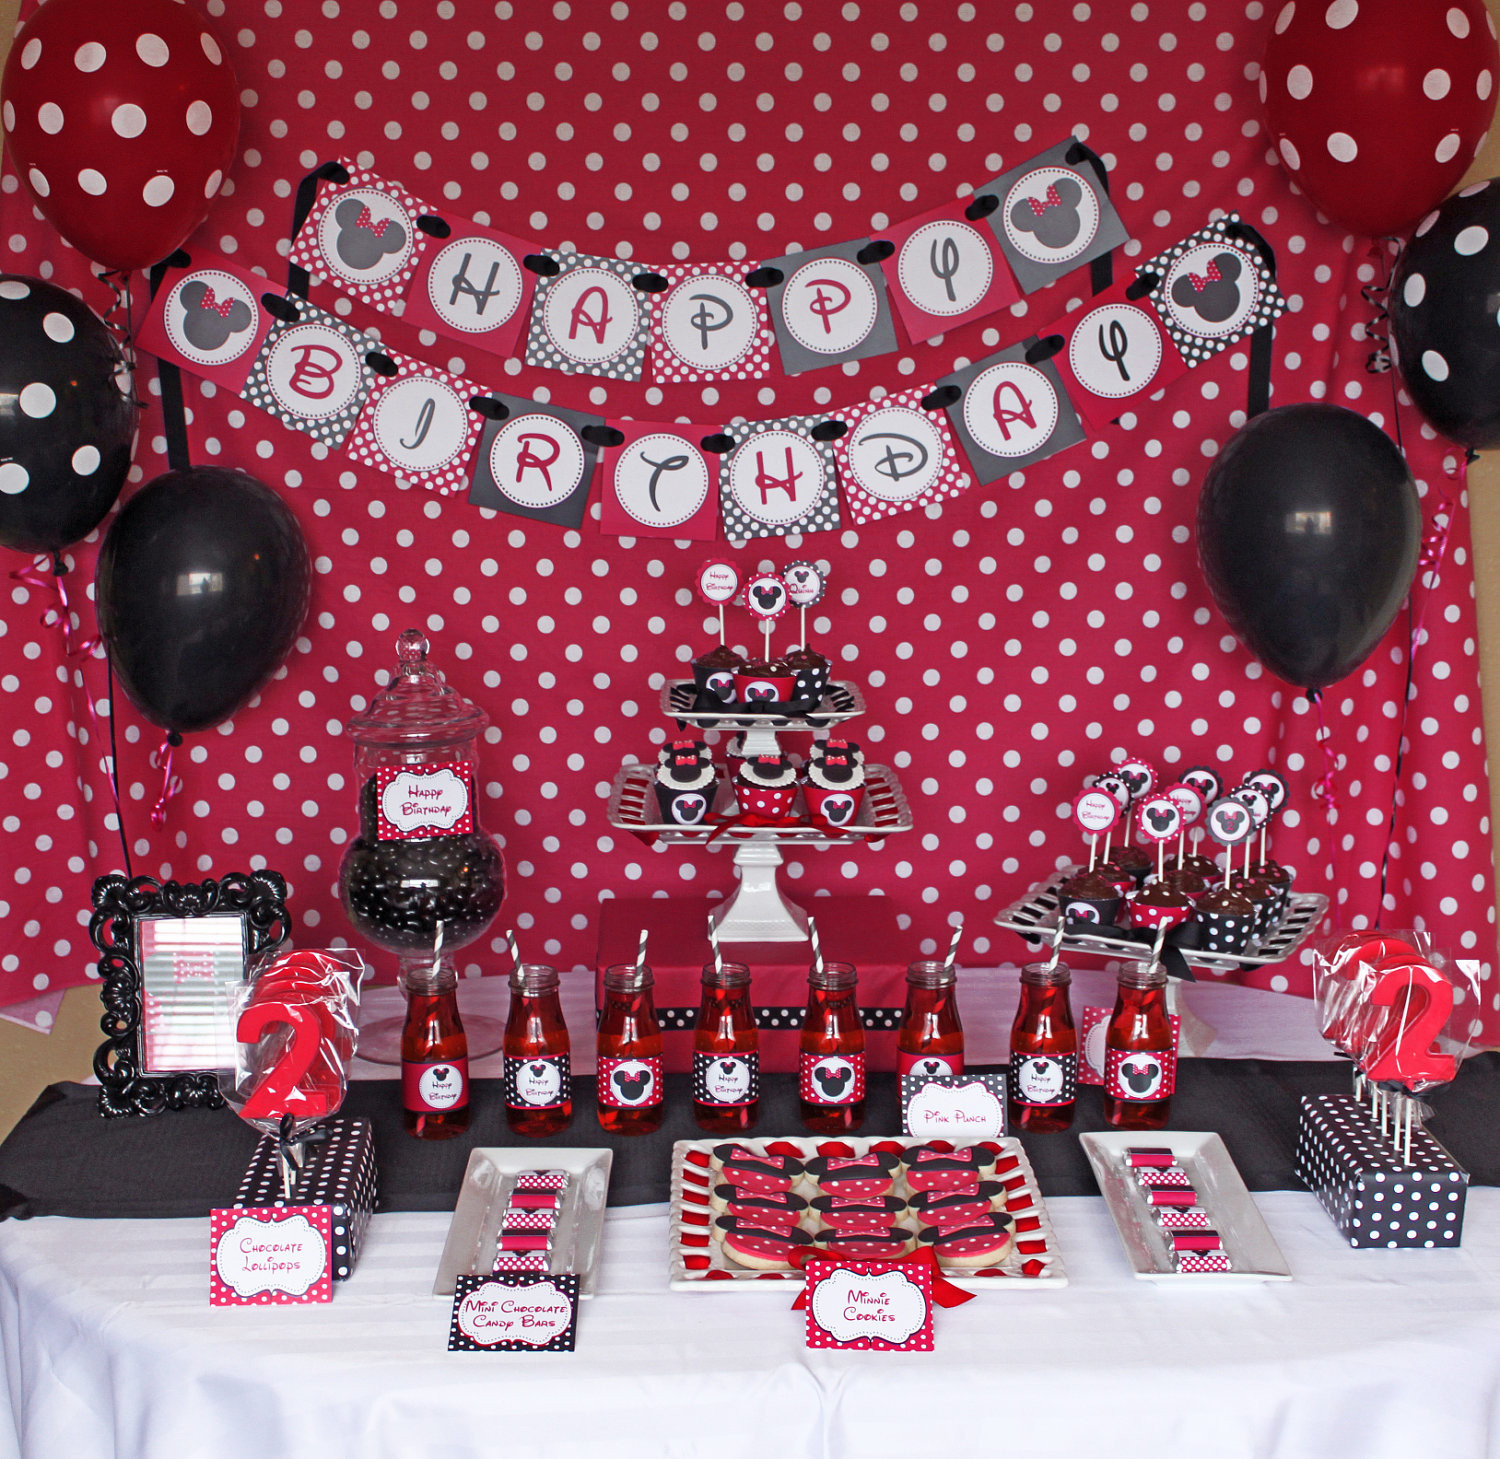 Minnie Mouse Birthday Decorations Red
 Minnie Mouse Red Deluxe birthday party package PRINTABLE red